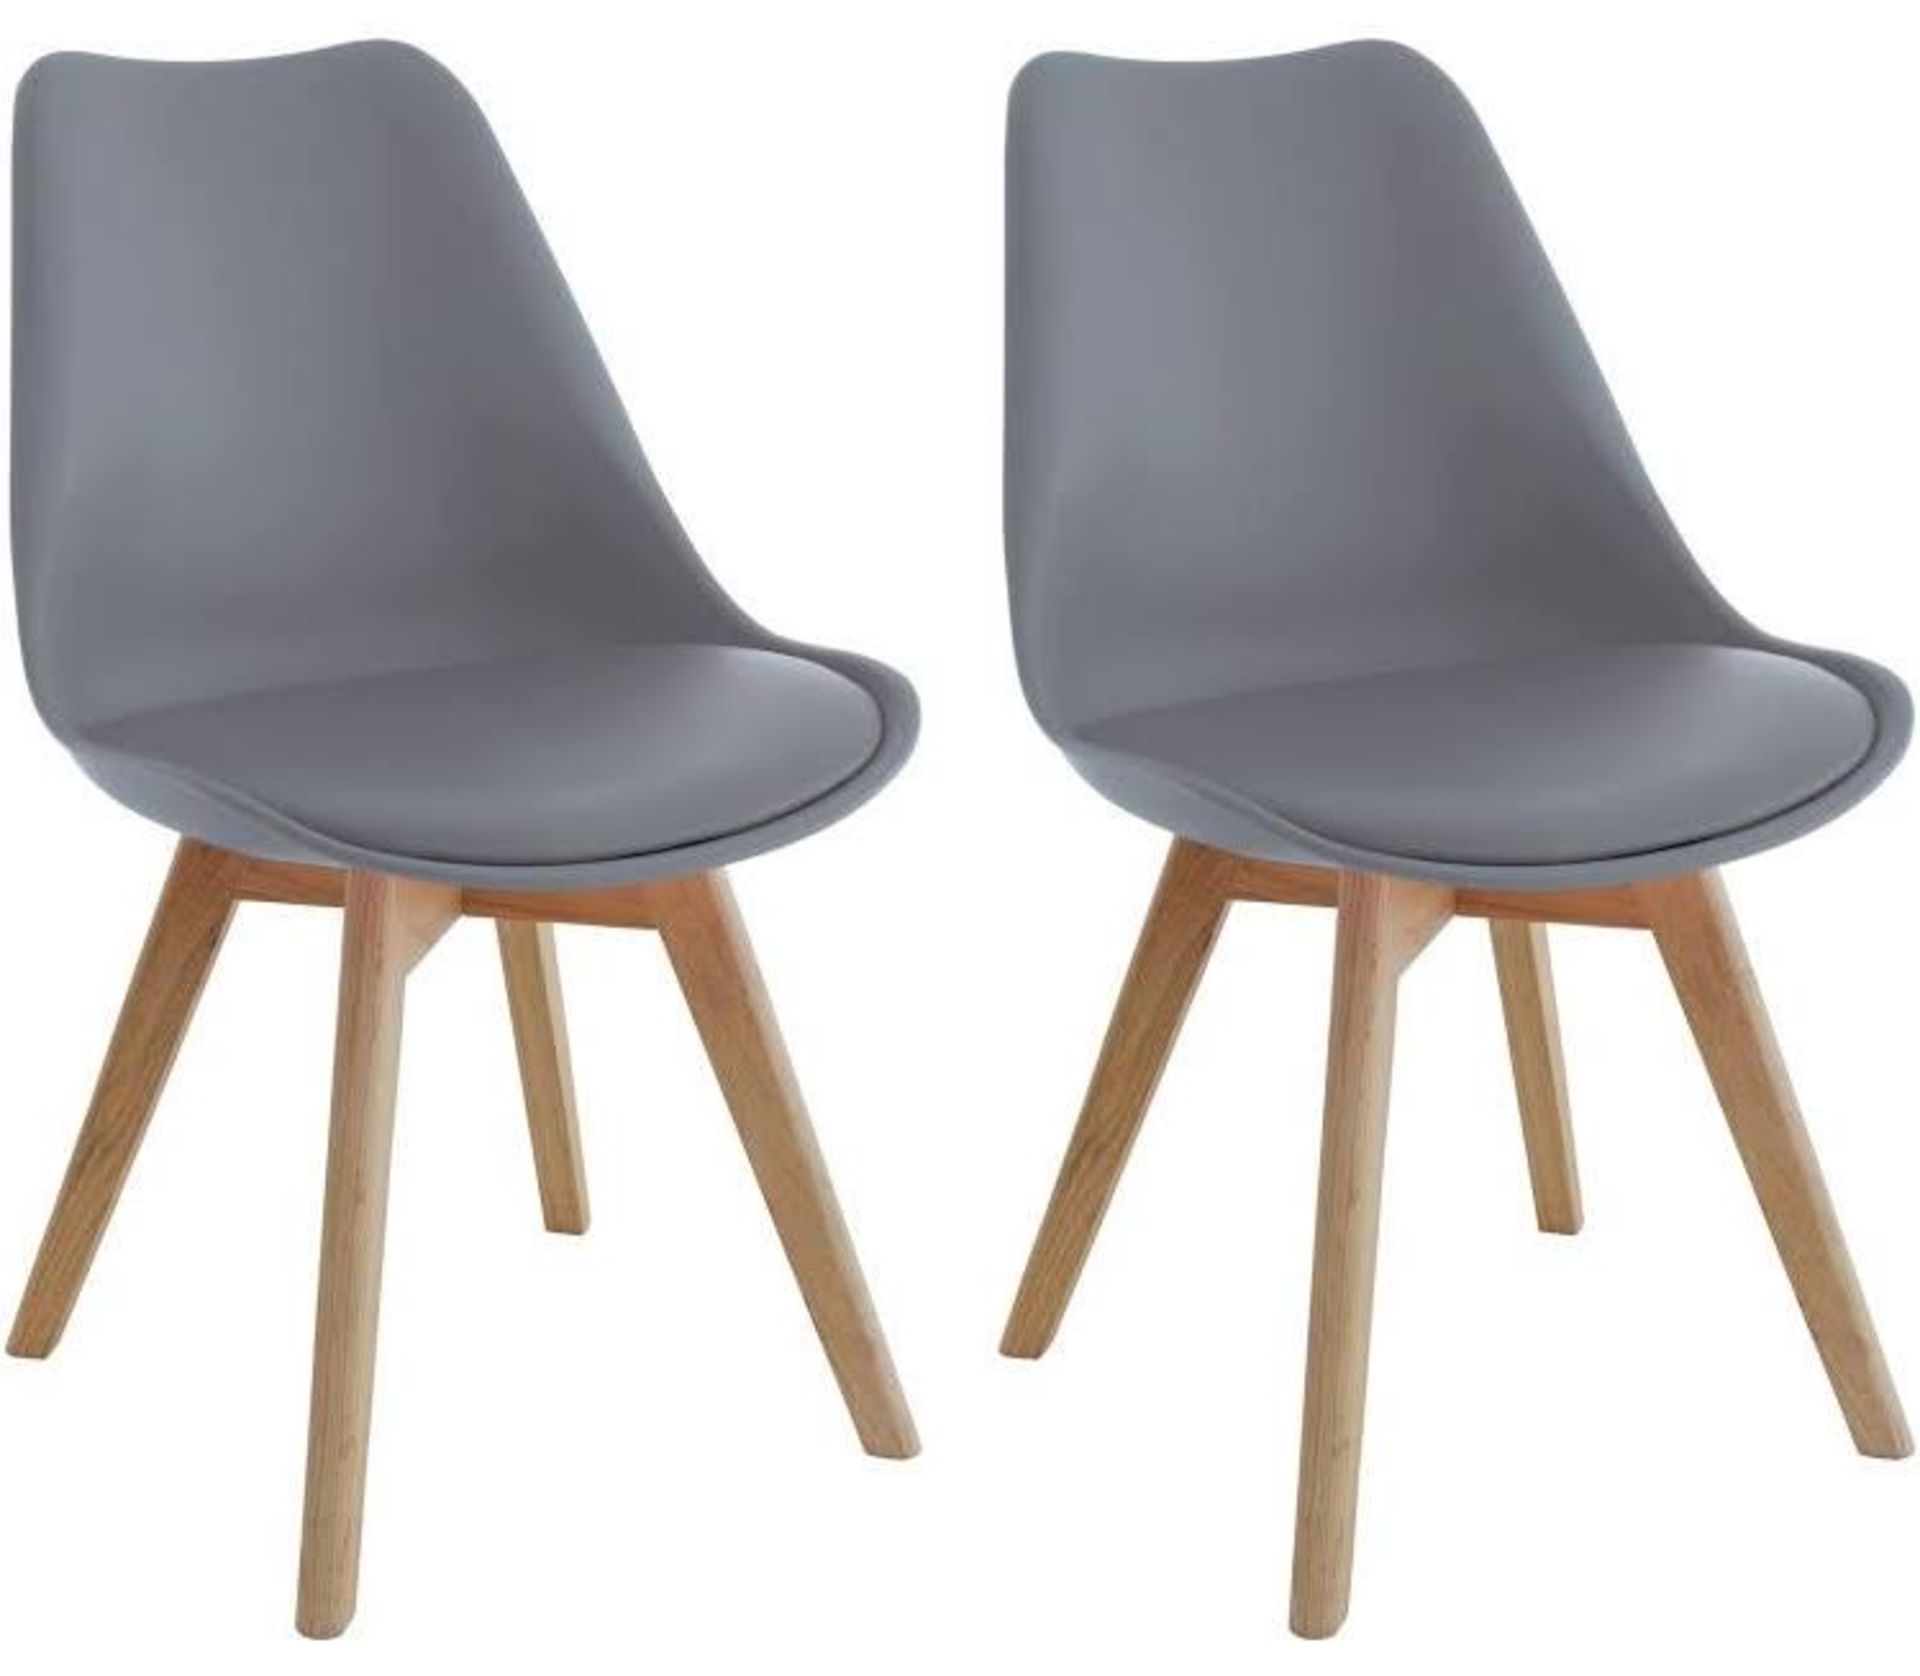 LOUVRE PAIR OF PADDED DINING CHAIRS
IN GREY - RRP £179 PER PAIR